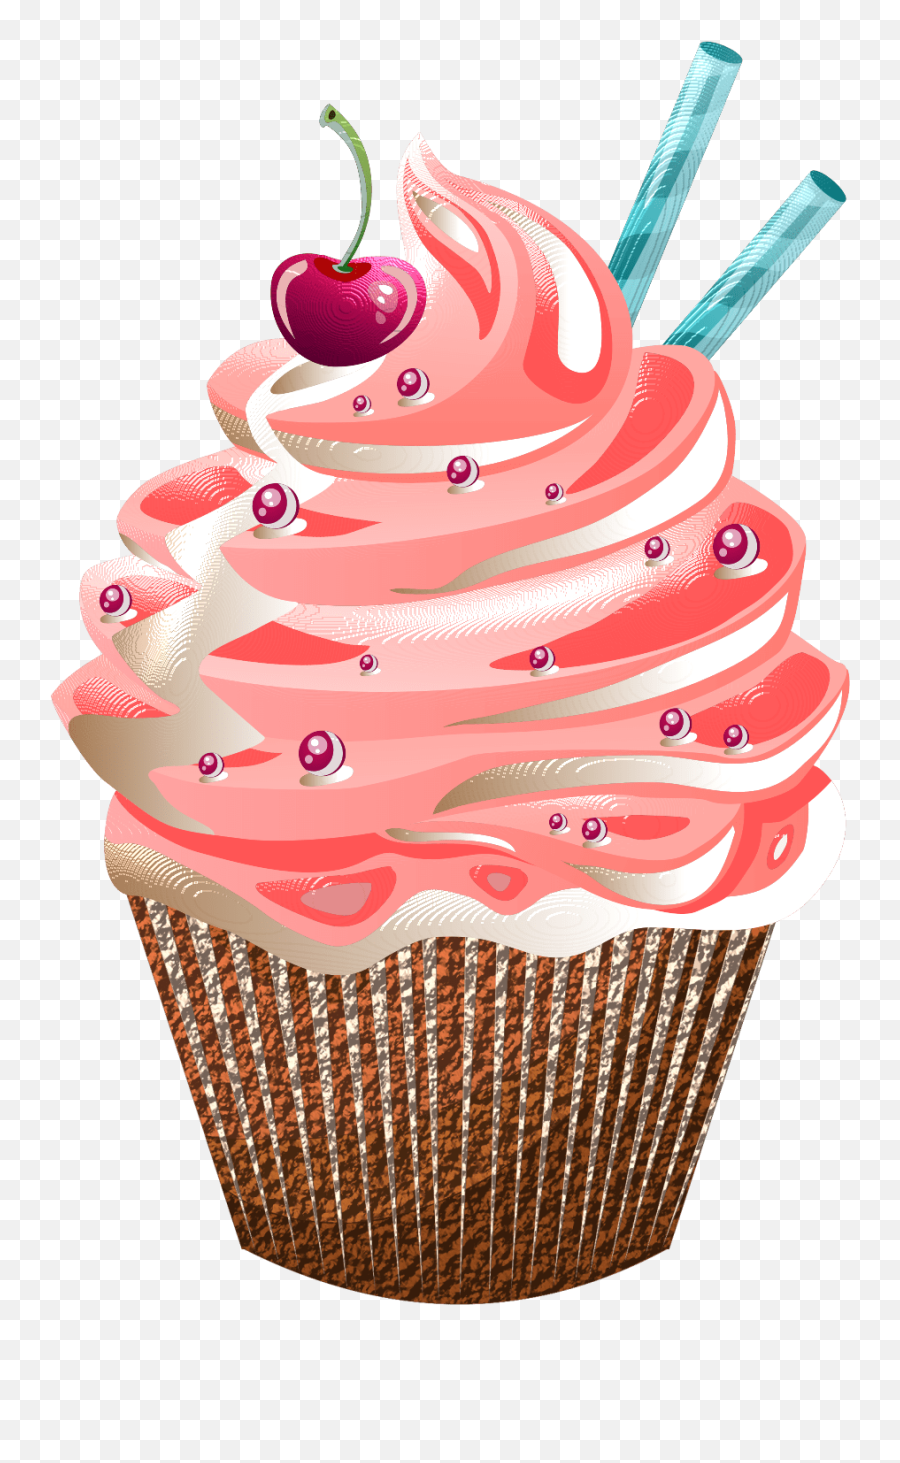 Cupcakes 210 X 297 Clipart - Transparent Background Cupcake Clipart Png,Cupcakes Png